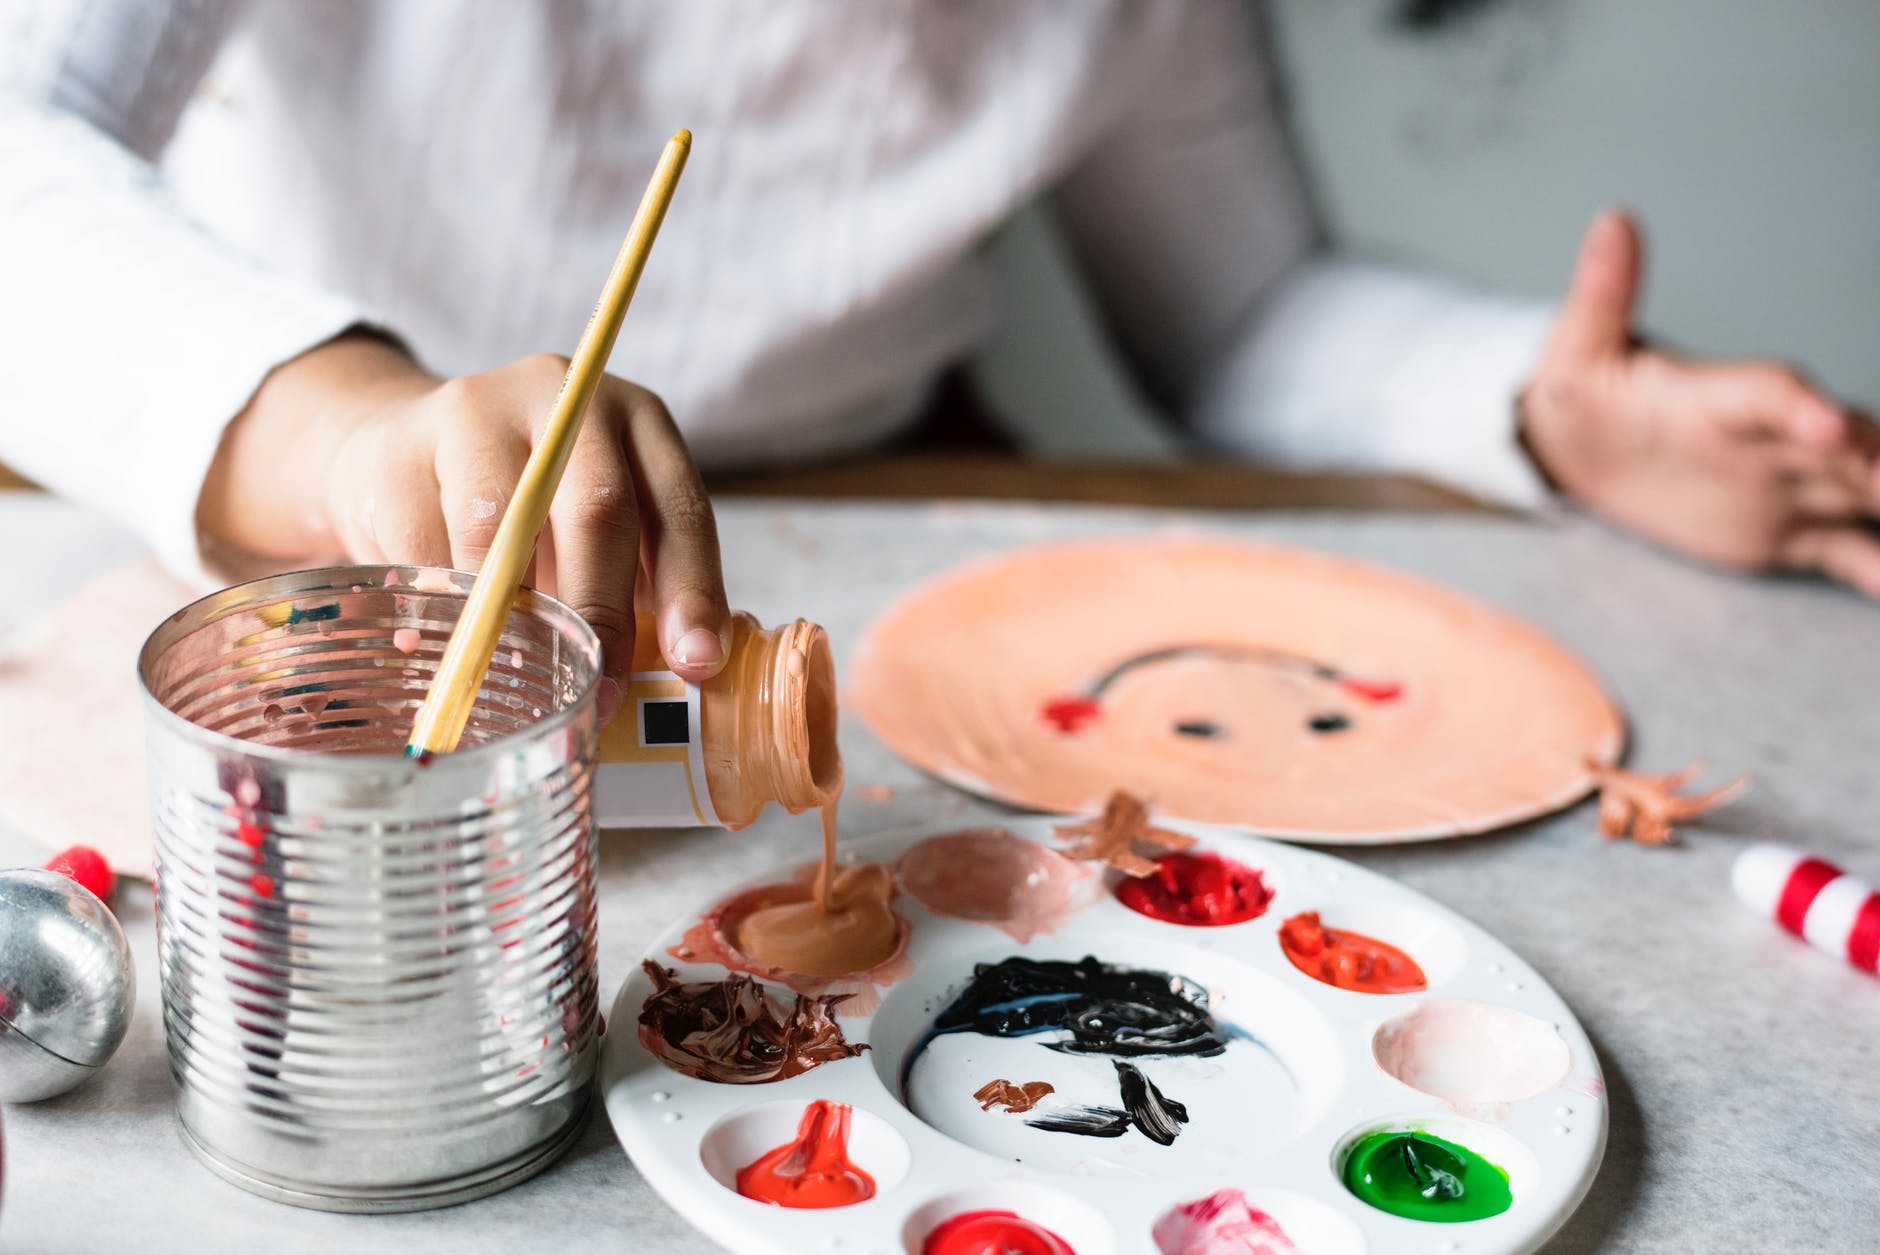 There's nothing quite like playing with art materials to help kids develop their imagination. The endless possibilities of creative expression that come with playful kids' art materials can help children to learn, explore and develop their skills.